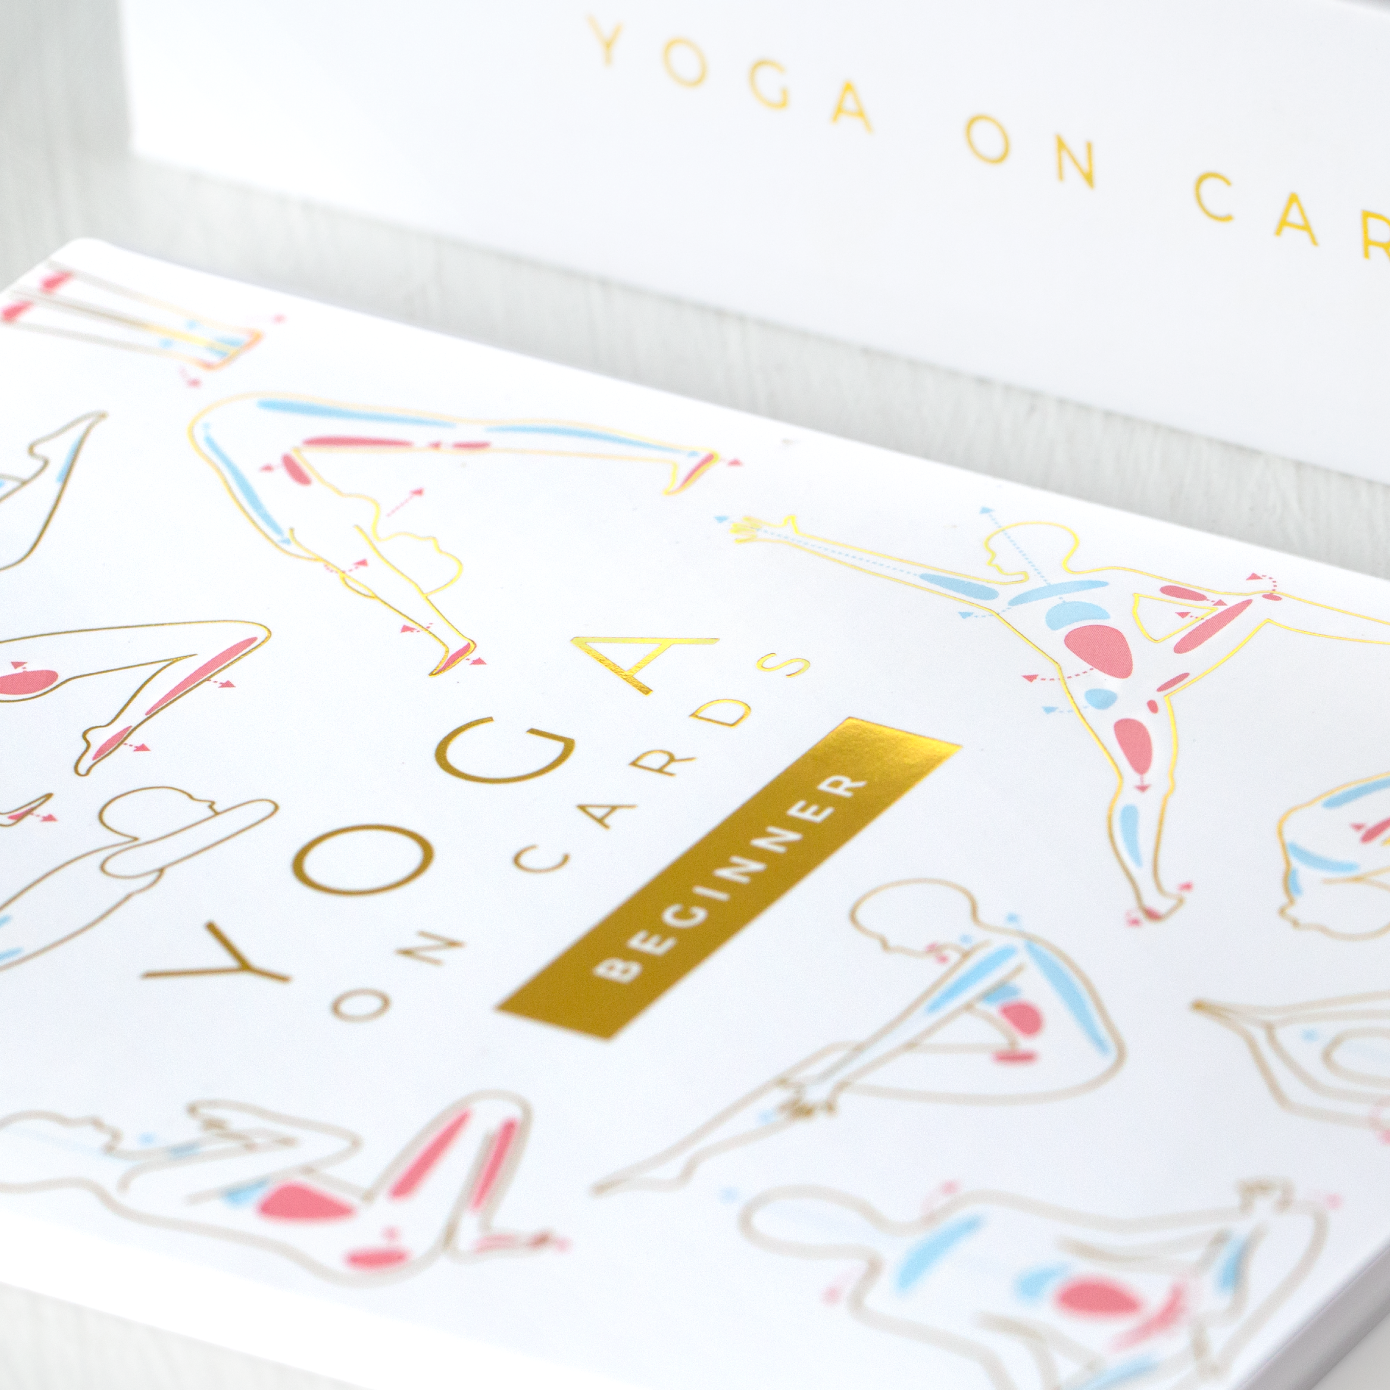  TurnOnLove Yoga Exercise Cards-Yoga Poses Poster Workout Cards  for Women, Yoga Stuff Set of 70 Flash Cards for Home & Gym : Sports &  Outdoors